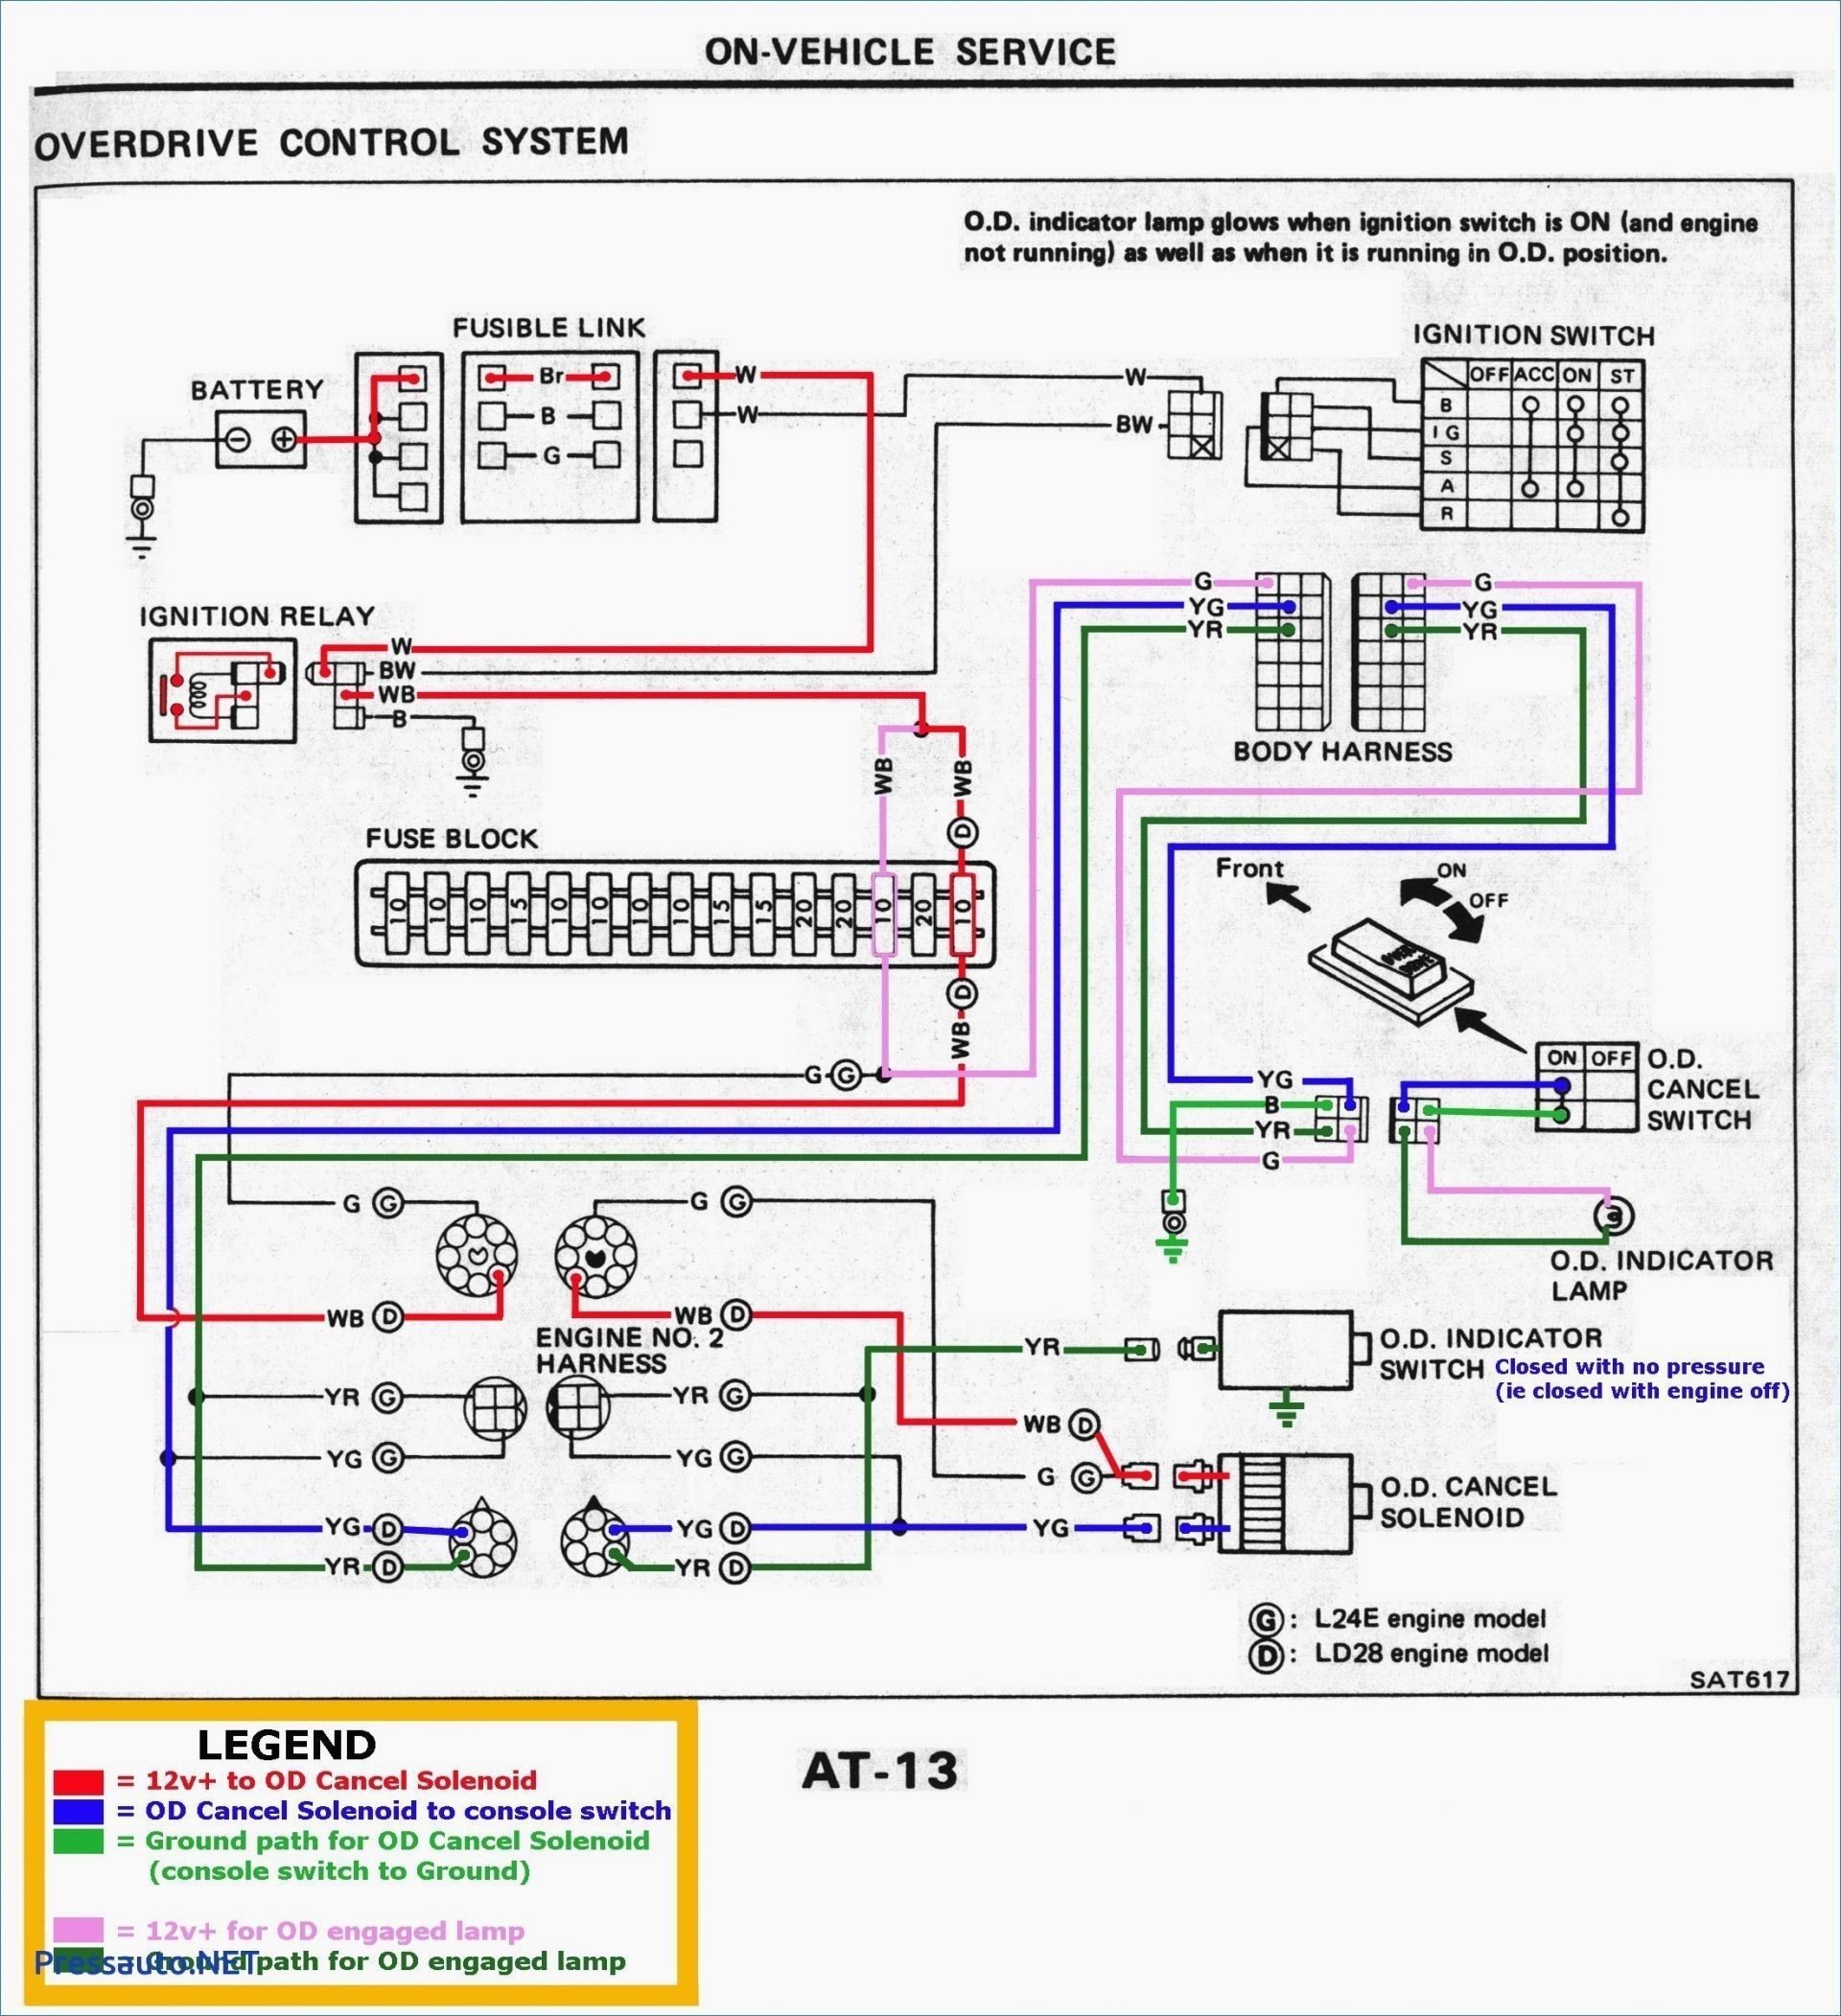 Home theatre Wiring Diagram Wiring Diagram for Home Audio New Wiring A House Video Introduction